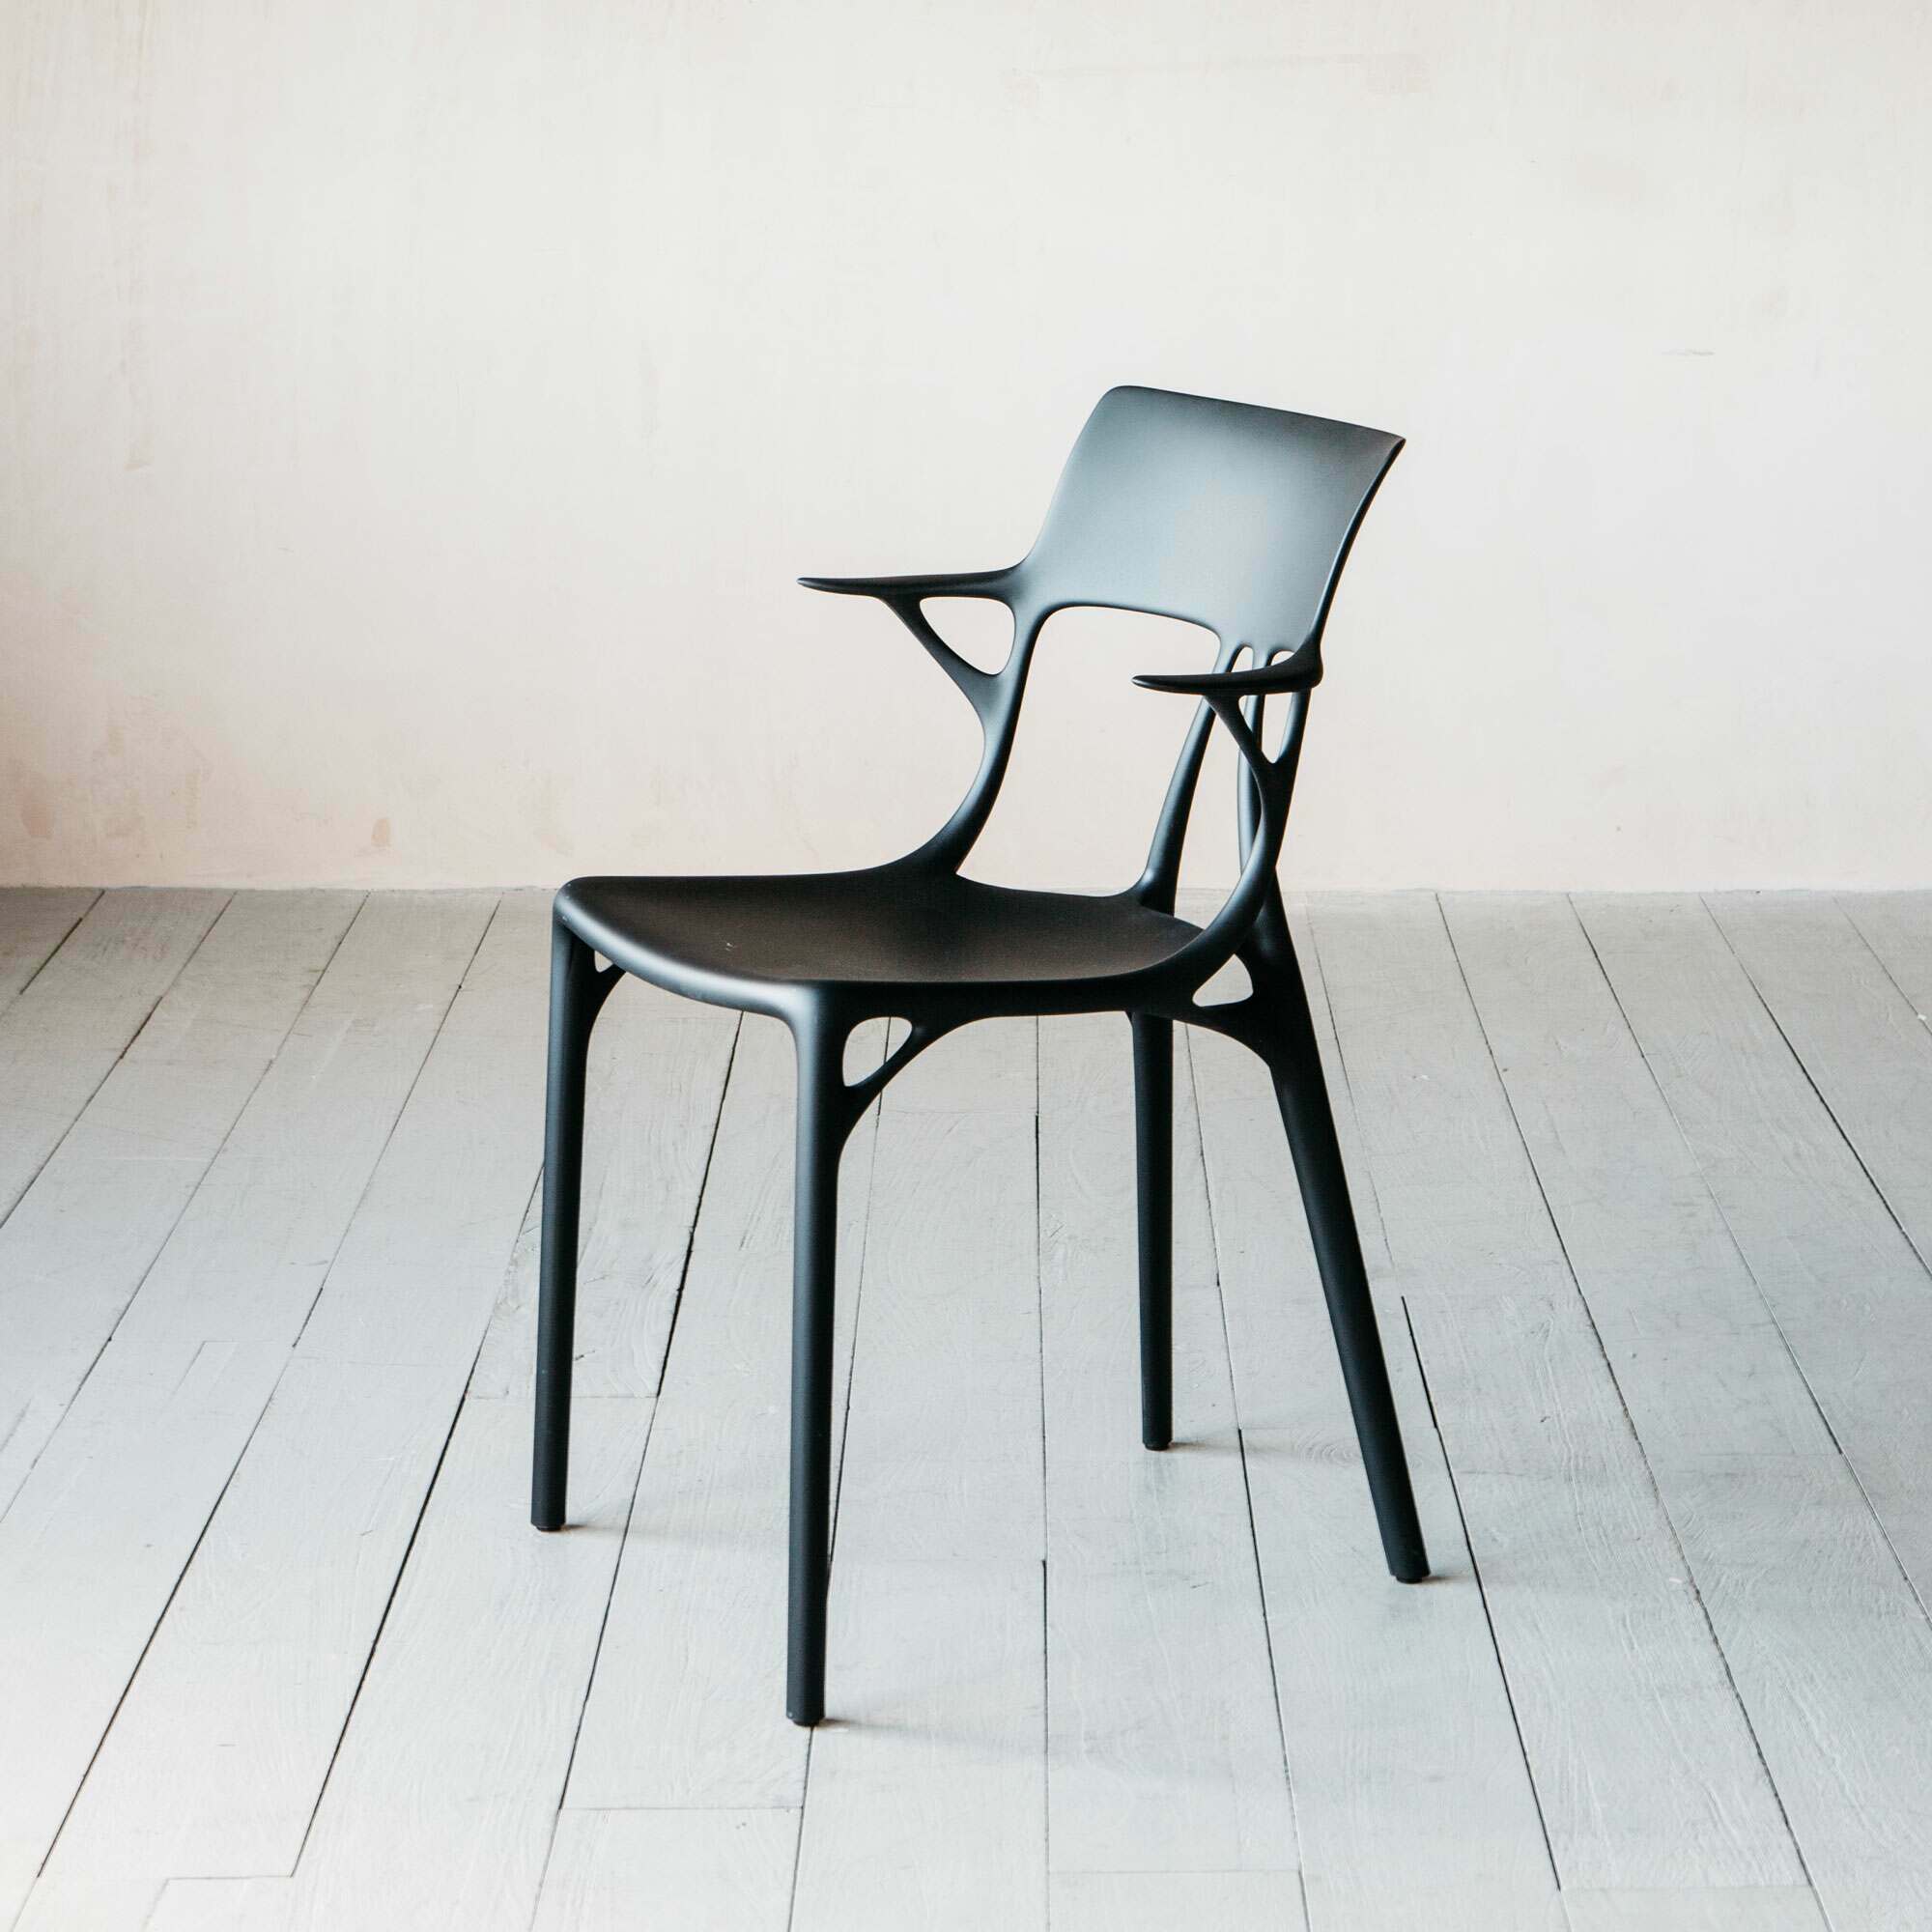 Read more about Graham and green kartell black a.i chair